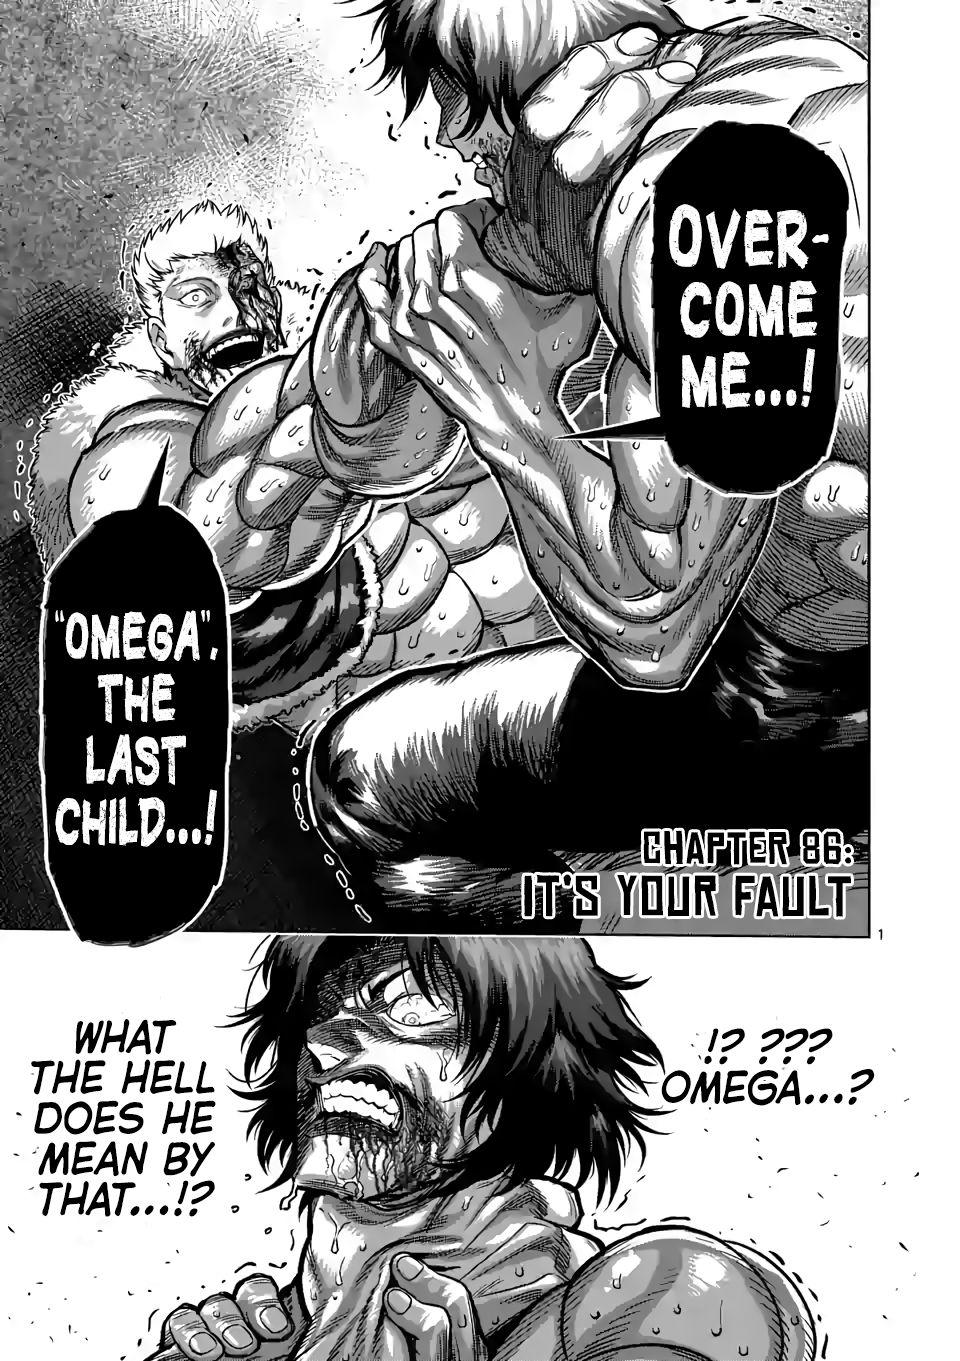 kengan Omega, Chapter 86 : It’s Your Fault